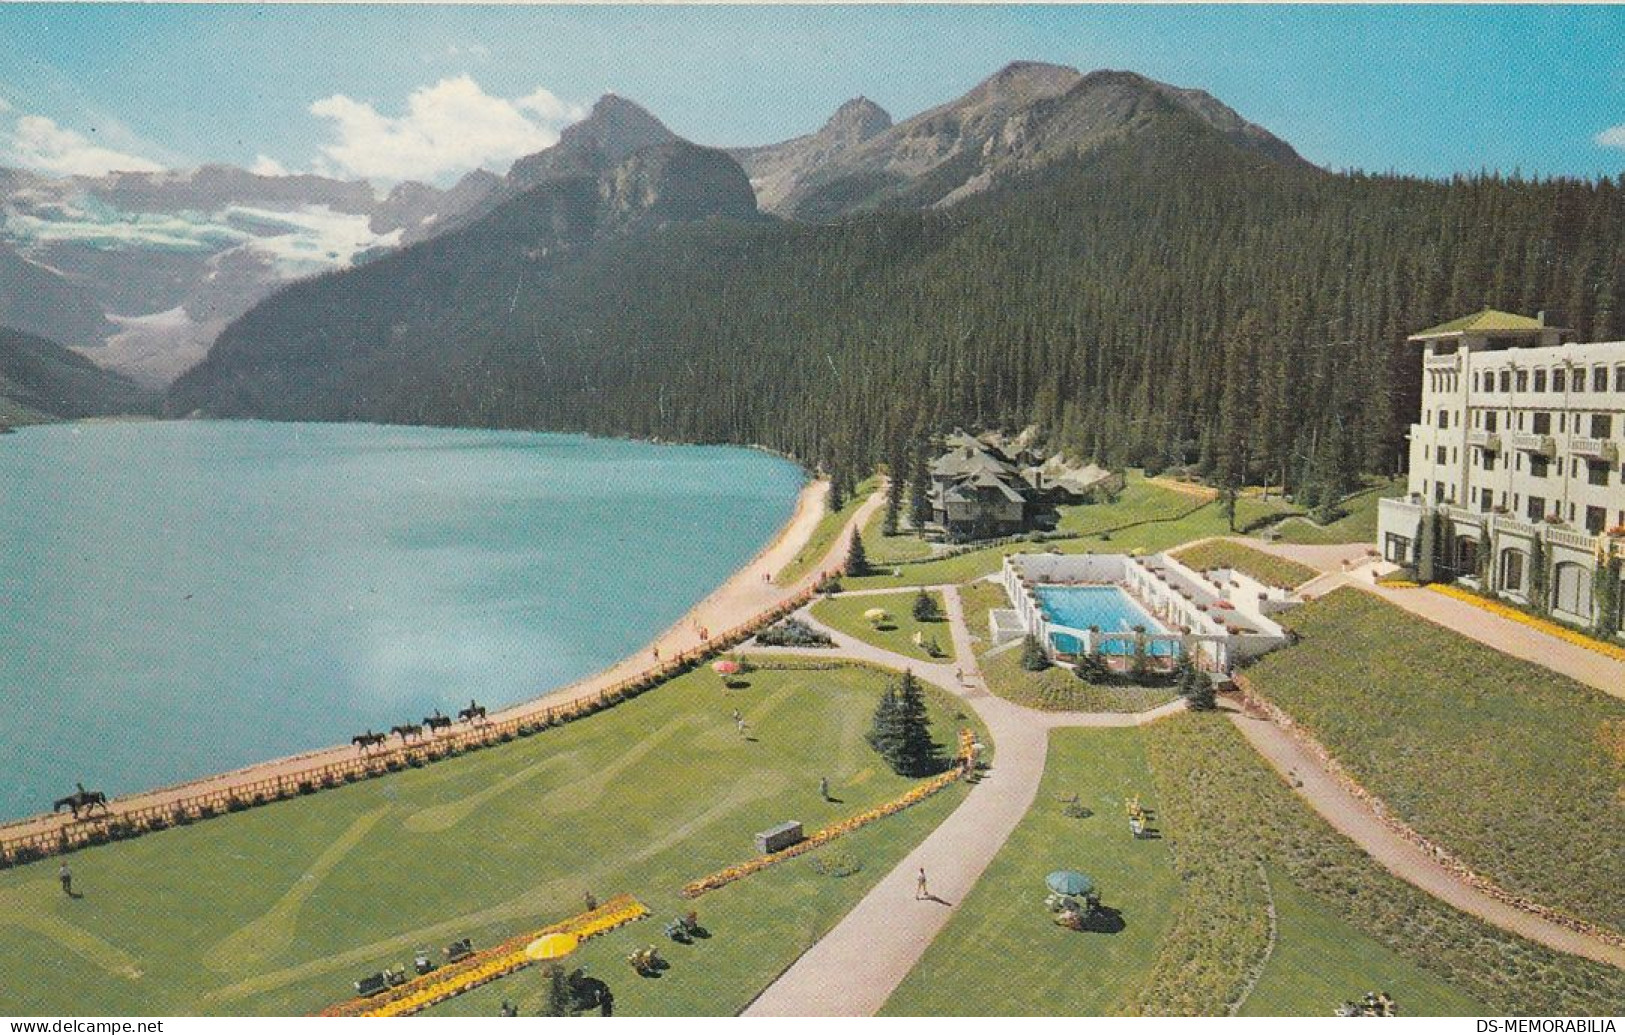 GOLF Course Lake Louise Canadian Rockies Canada - Golf